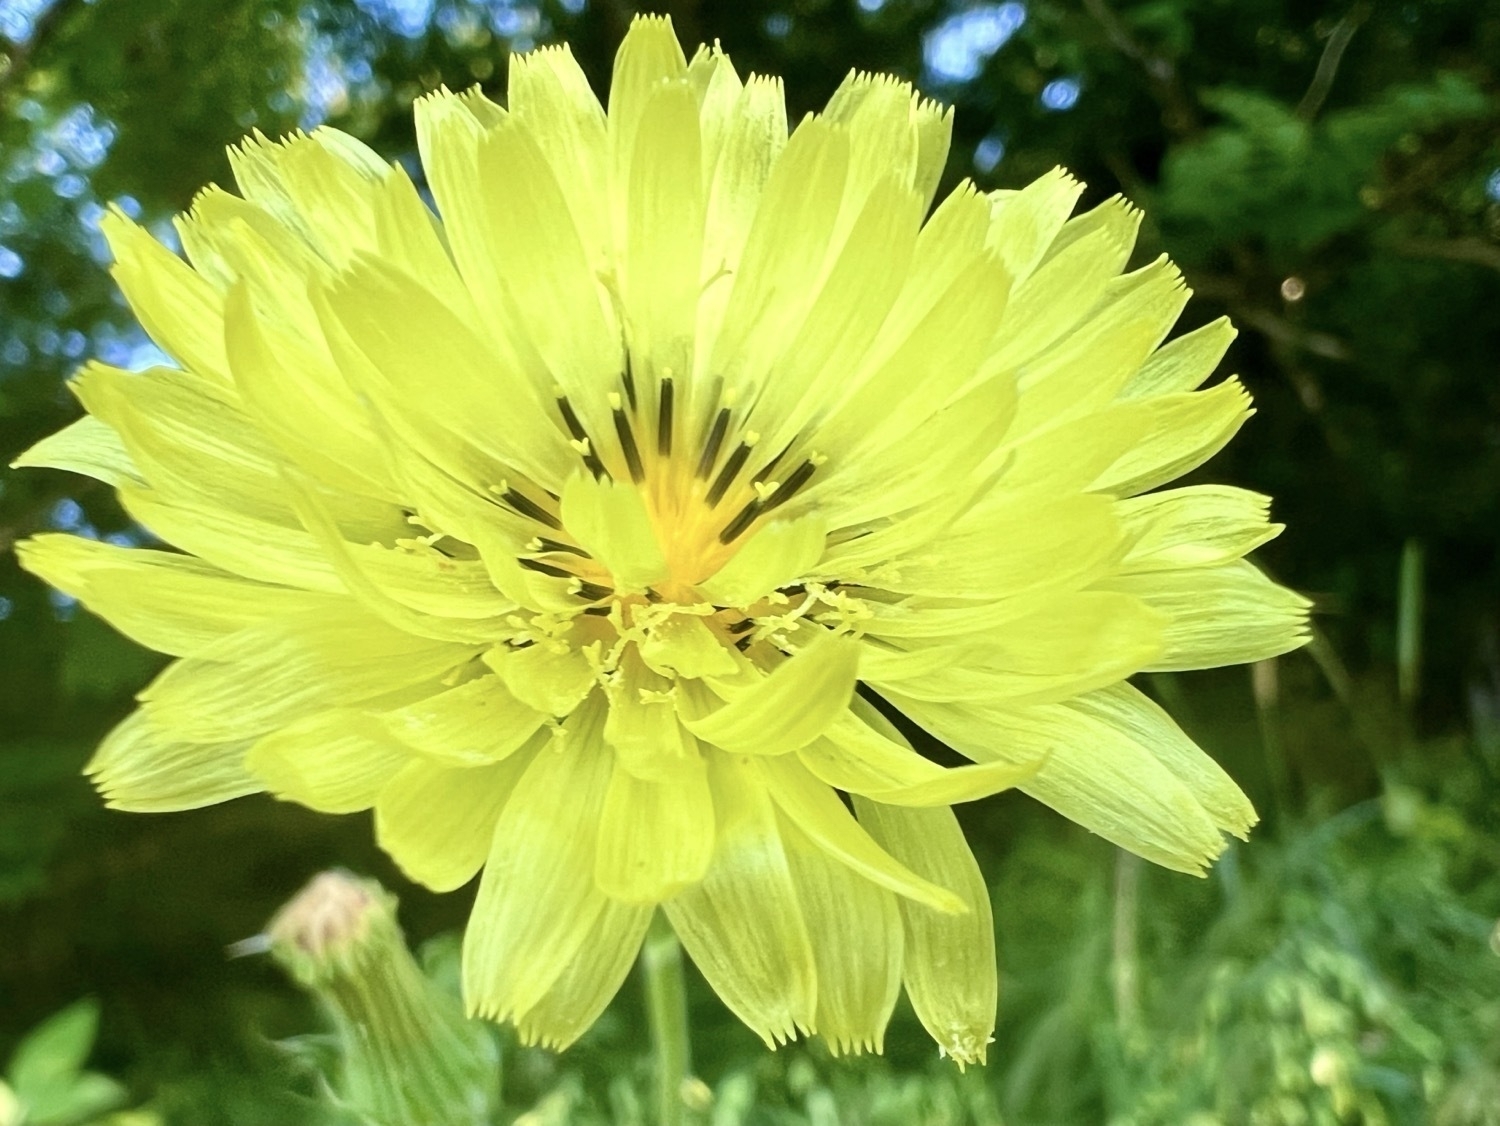 A close up image of a many petaled yellow flower with a darker yellow, orangish center that has 20 or so dark brown to black colored stamens, each tipped with a yellow anther. The tip of each petal is fringed. Dark green foliage of trees and bushes are visible behind the flower.